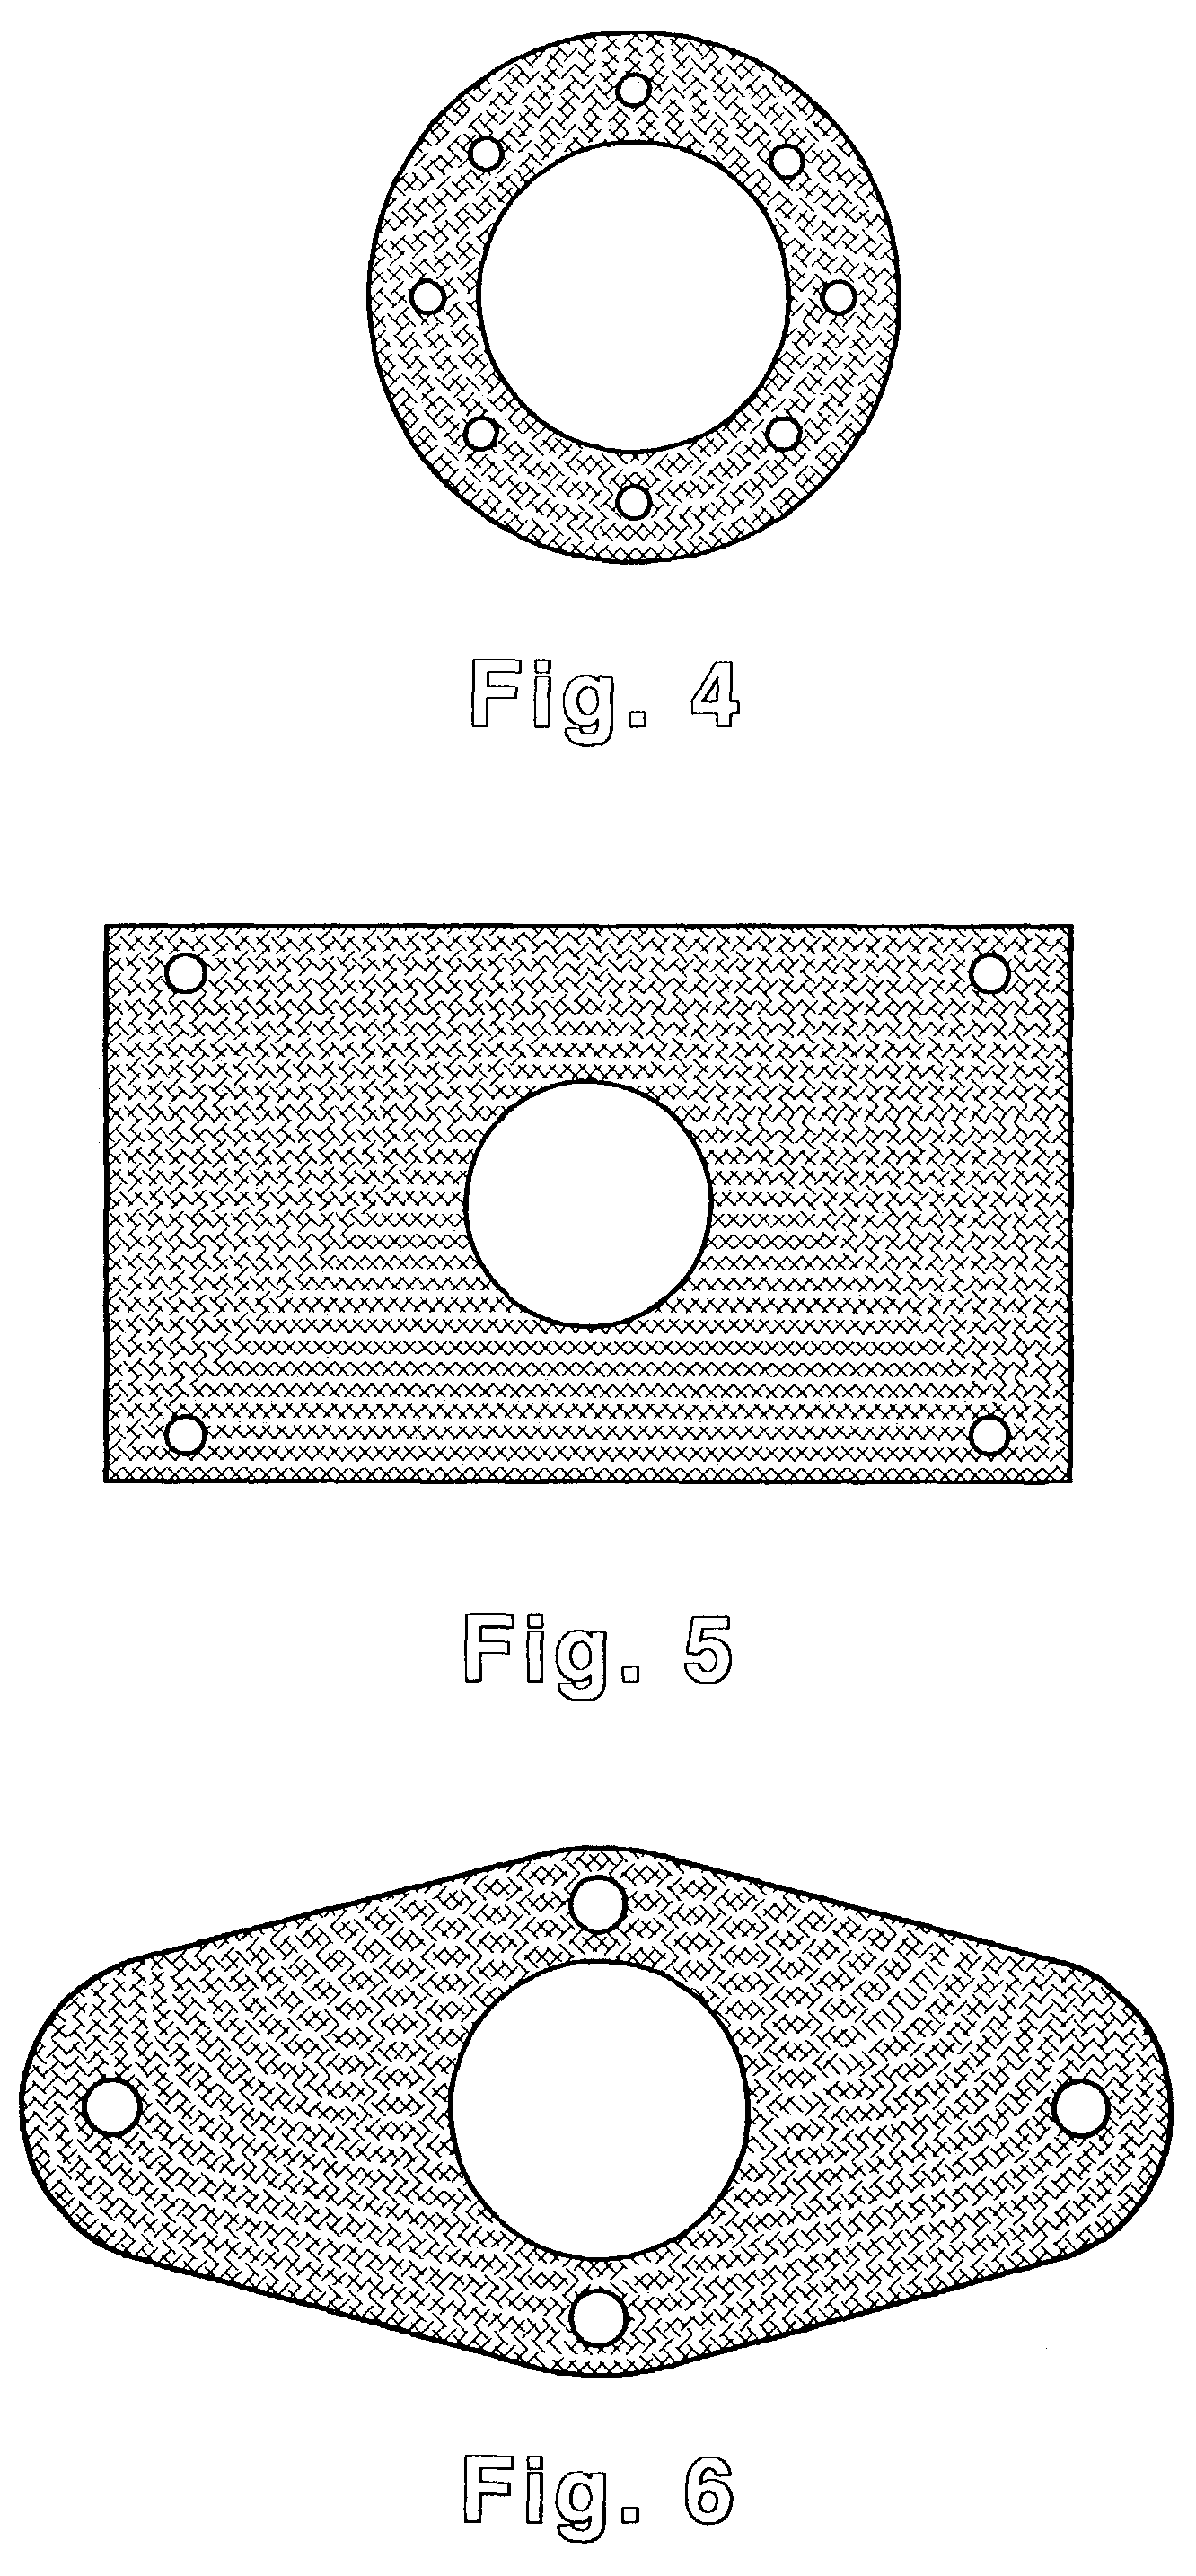 Foam bodied gasket and gasket tape and method of making and using the same